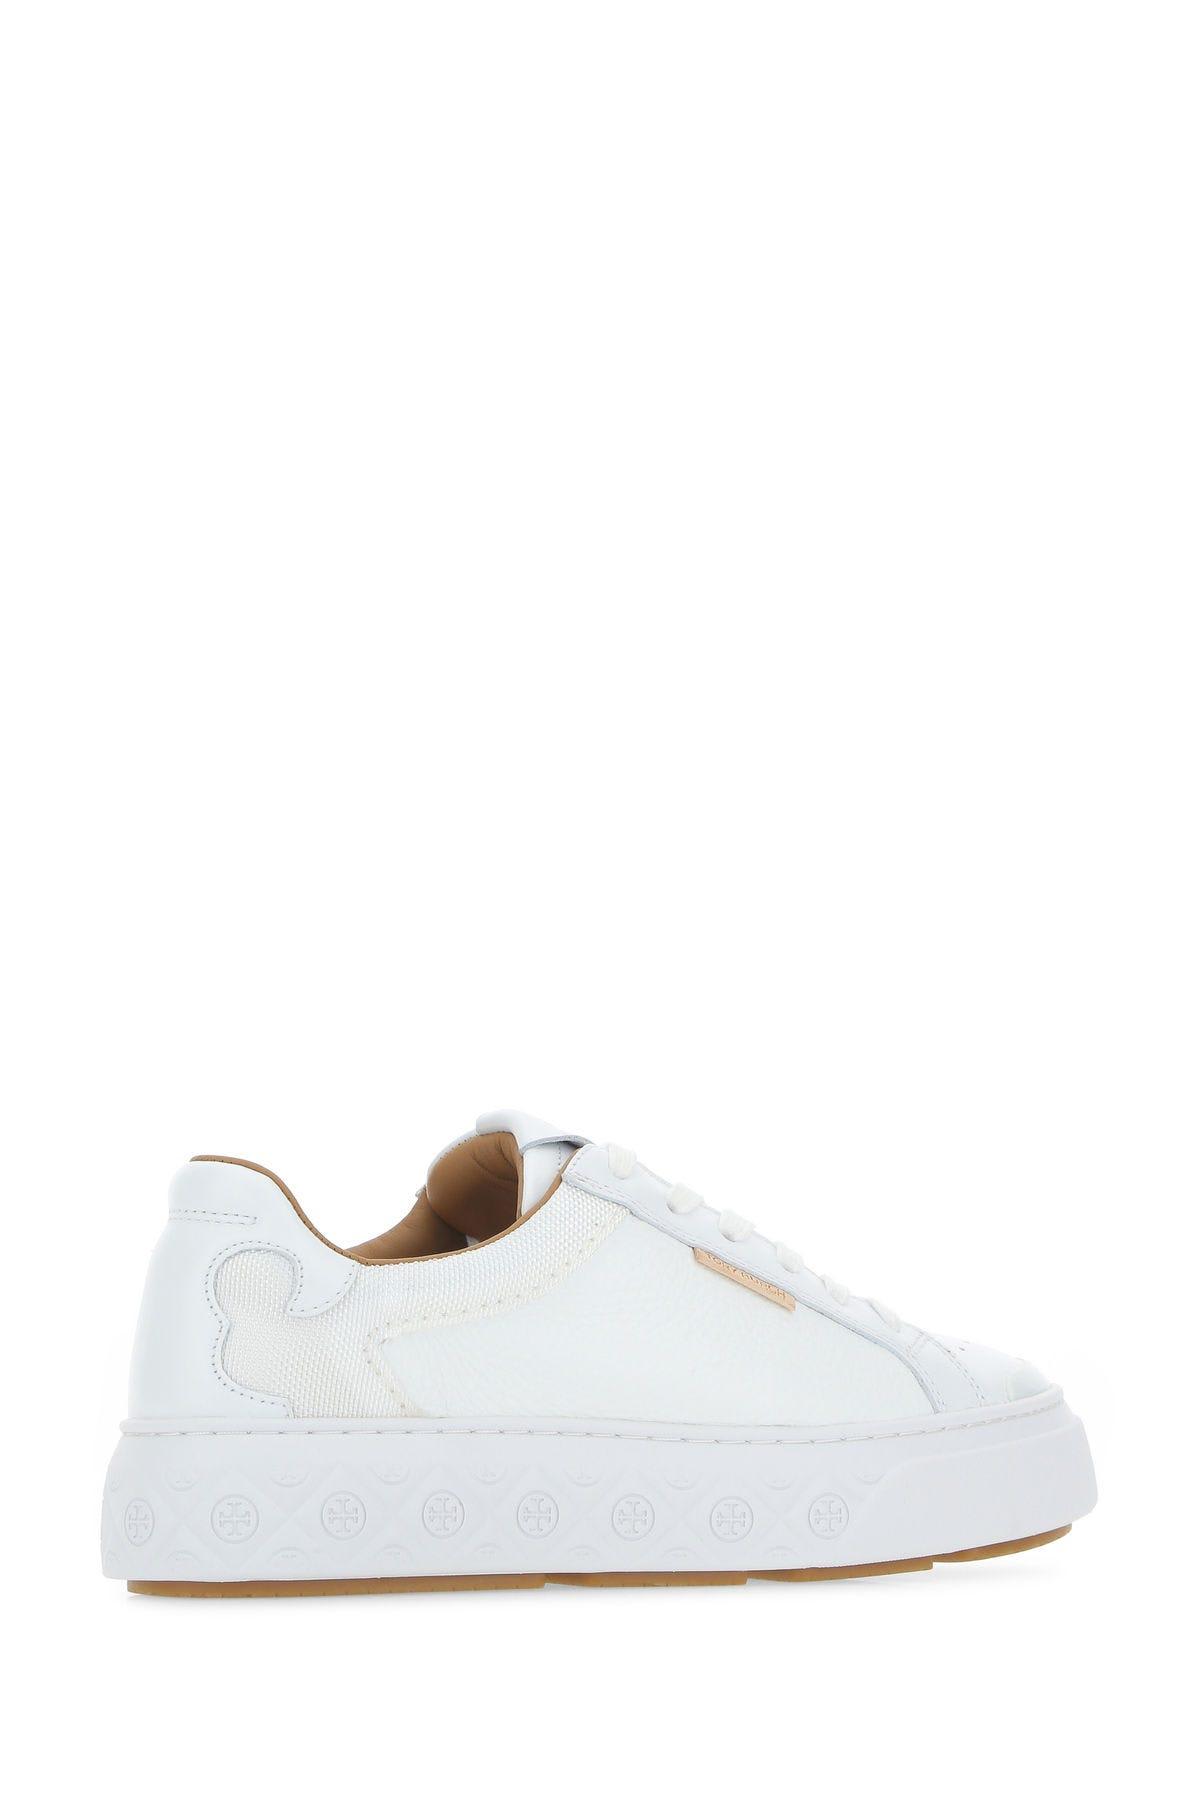 Shop Tory Burch White Leather Ladybug Sneakers